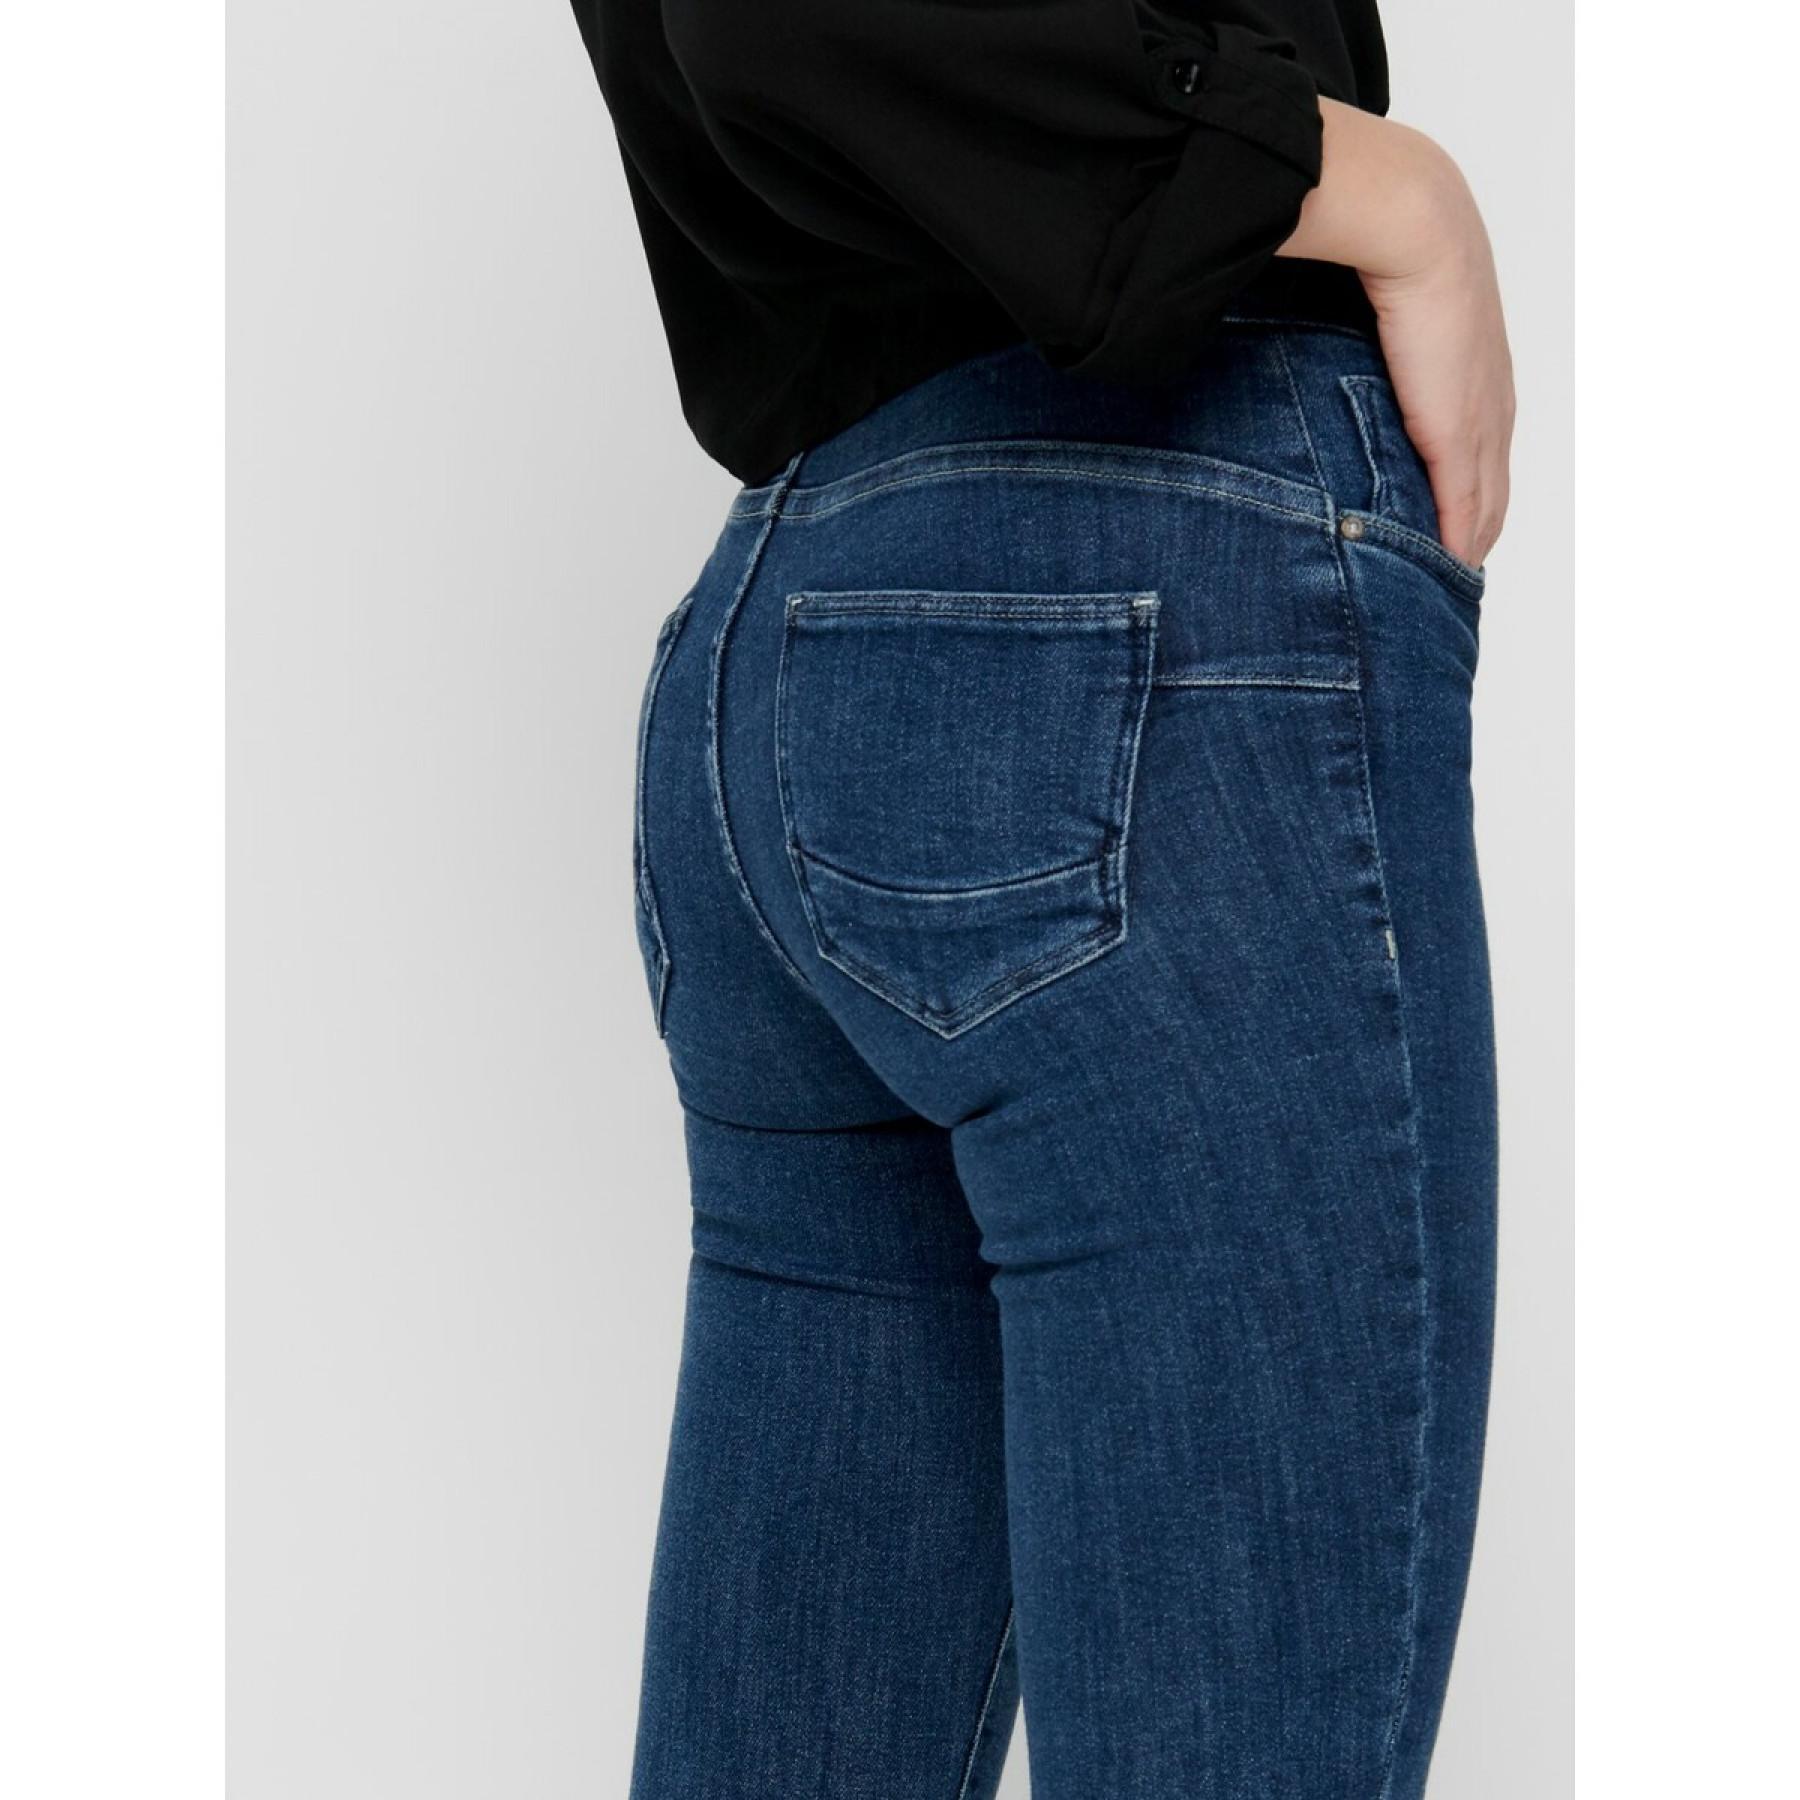 Women's jeans Only Power life